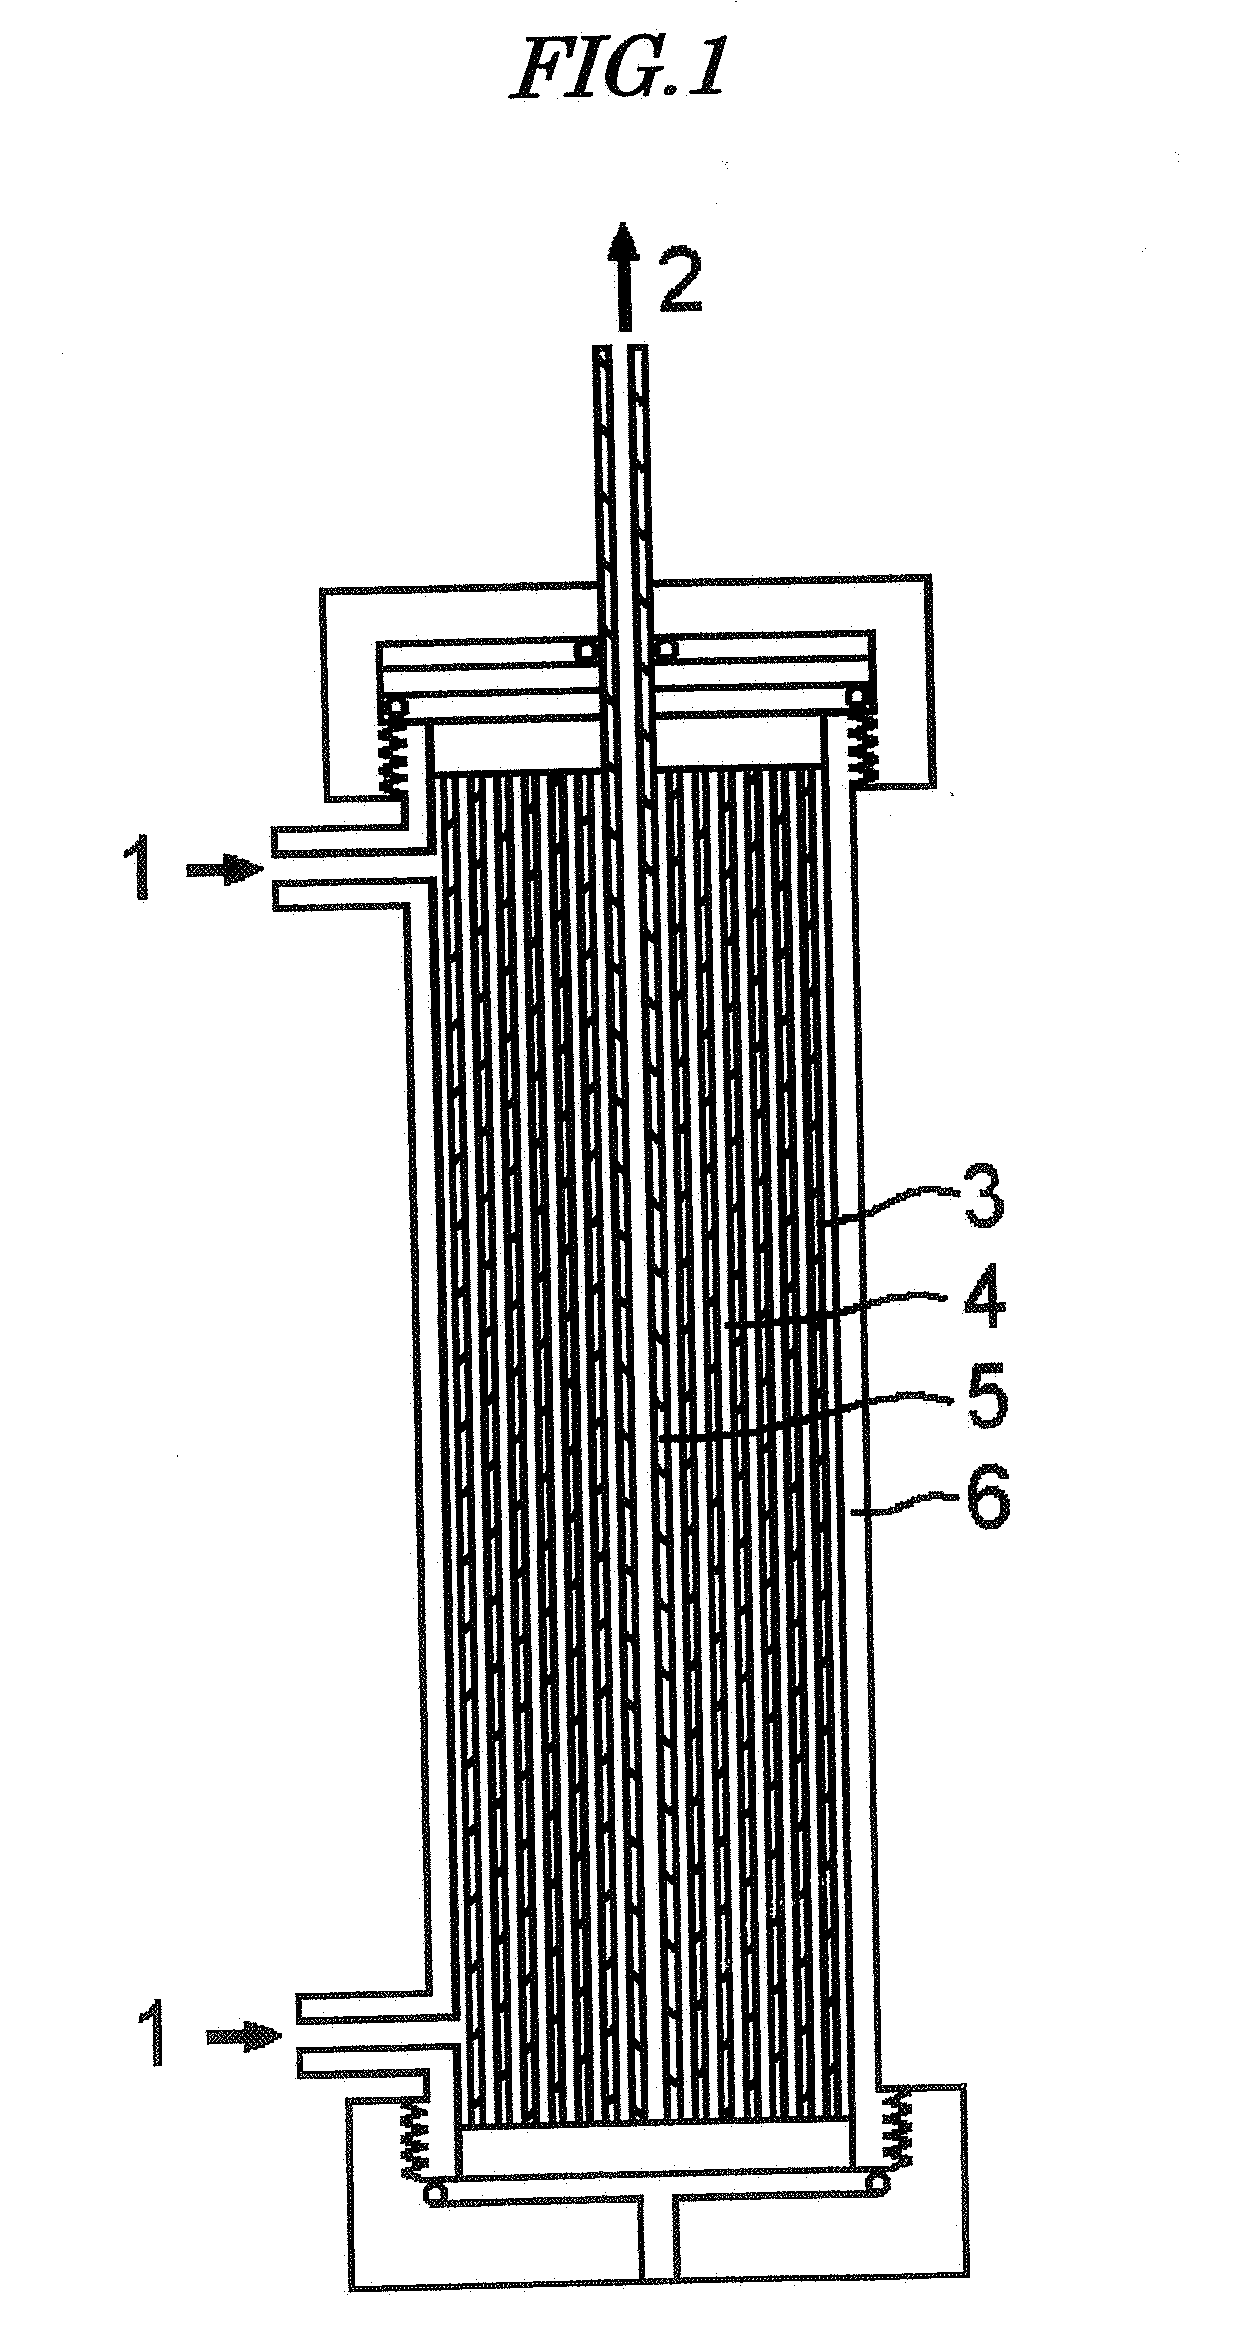 Porous Sheet-Form Material For Cell Culture, And Bioreactor And Culturing Method Utilizing Same